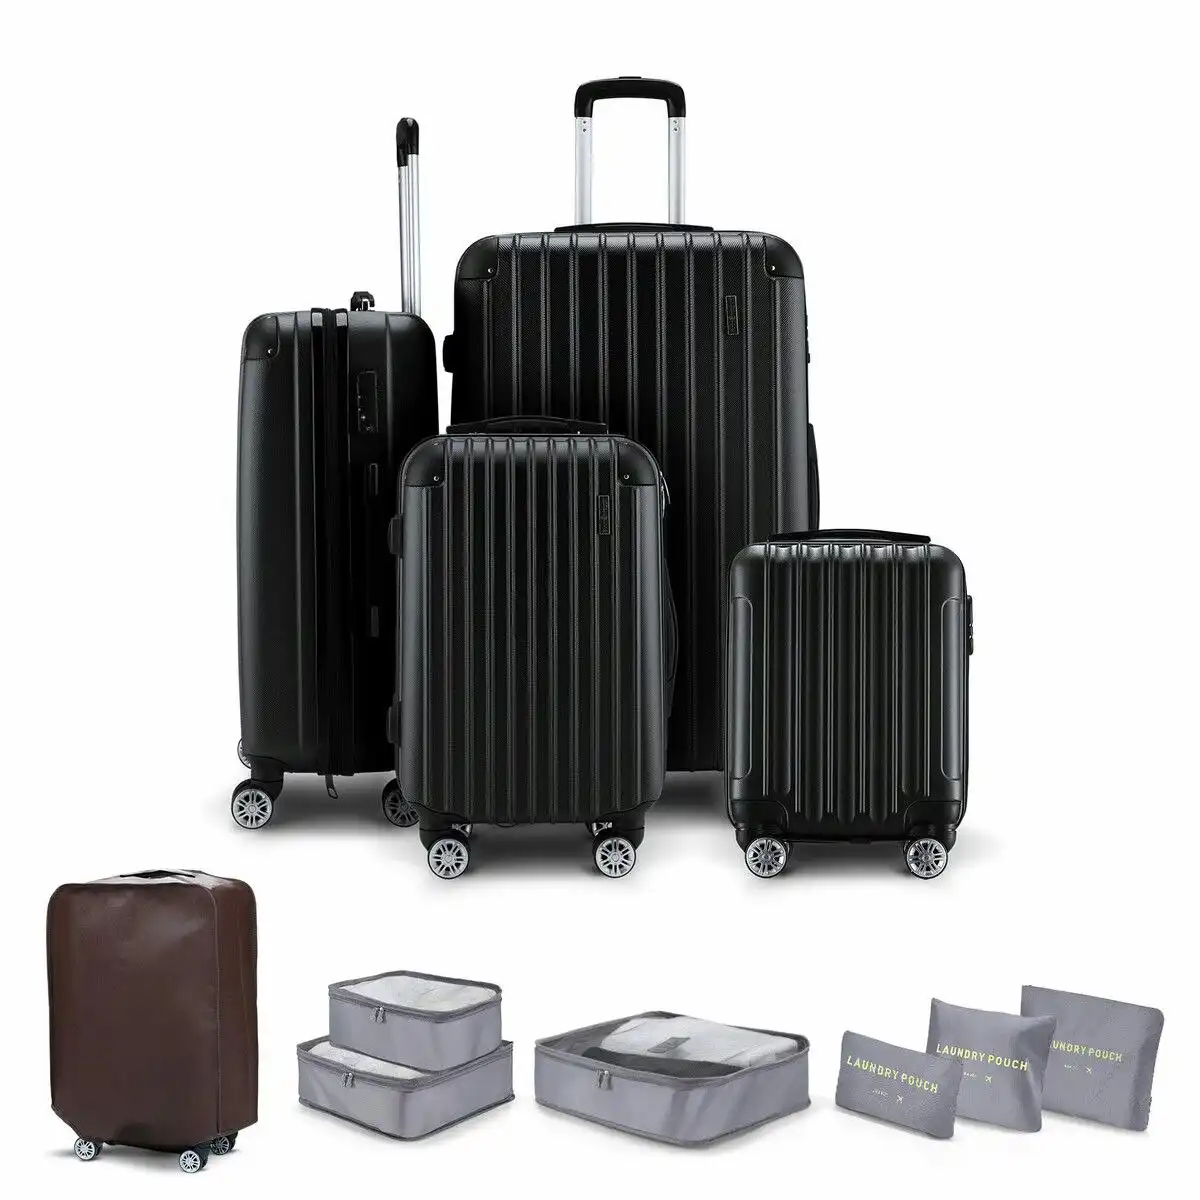 Buon Viaggio 4 Piece Luggage Suitcase Set Carry On Traveller Bag Hard Shell TSA Lock Checked Trolley Rolling Lightweight Black